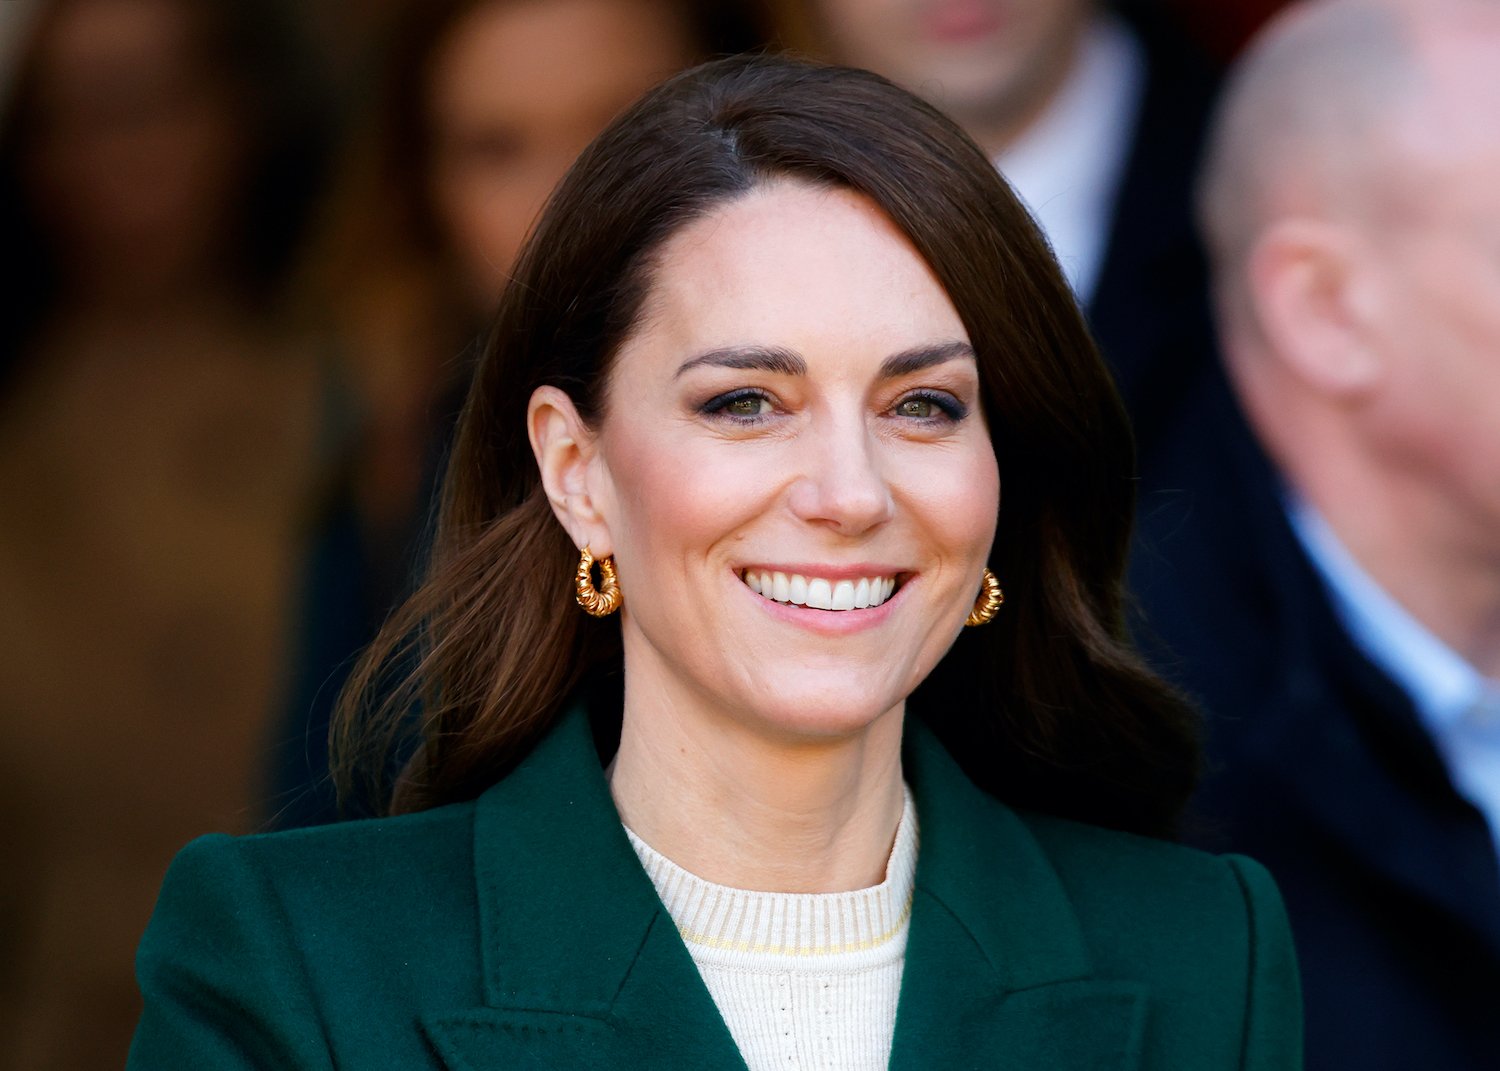 Kate Middleton ‘Does Everything to Not Look Like a Royal’ During Visit With Children, Body Language Expert Says